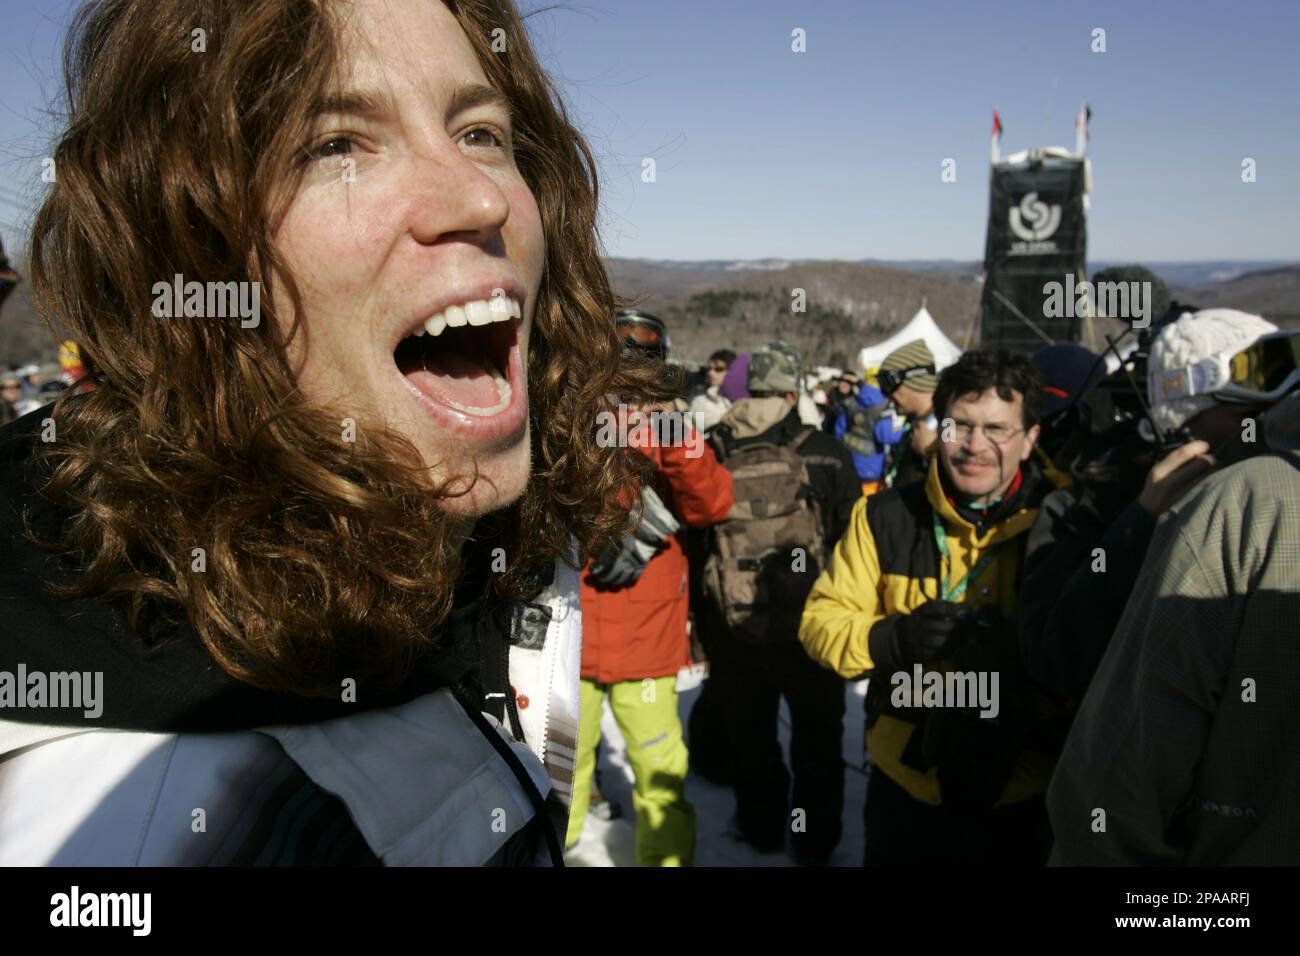 Shaun White, left, of Carlsbad, Calif., shouts after winning the men's  halfpipe finals at the Burton U.S. Open Snowboarding Championships,  Saturday, March 22, 2008, at Stratton Mountain Resort in Stratton, Vt. (AP